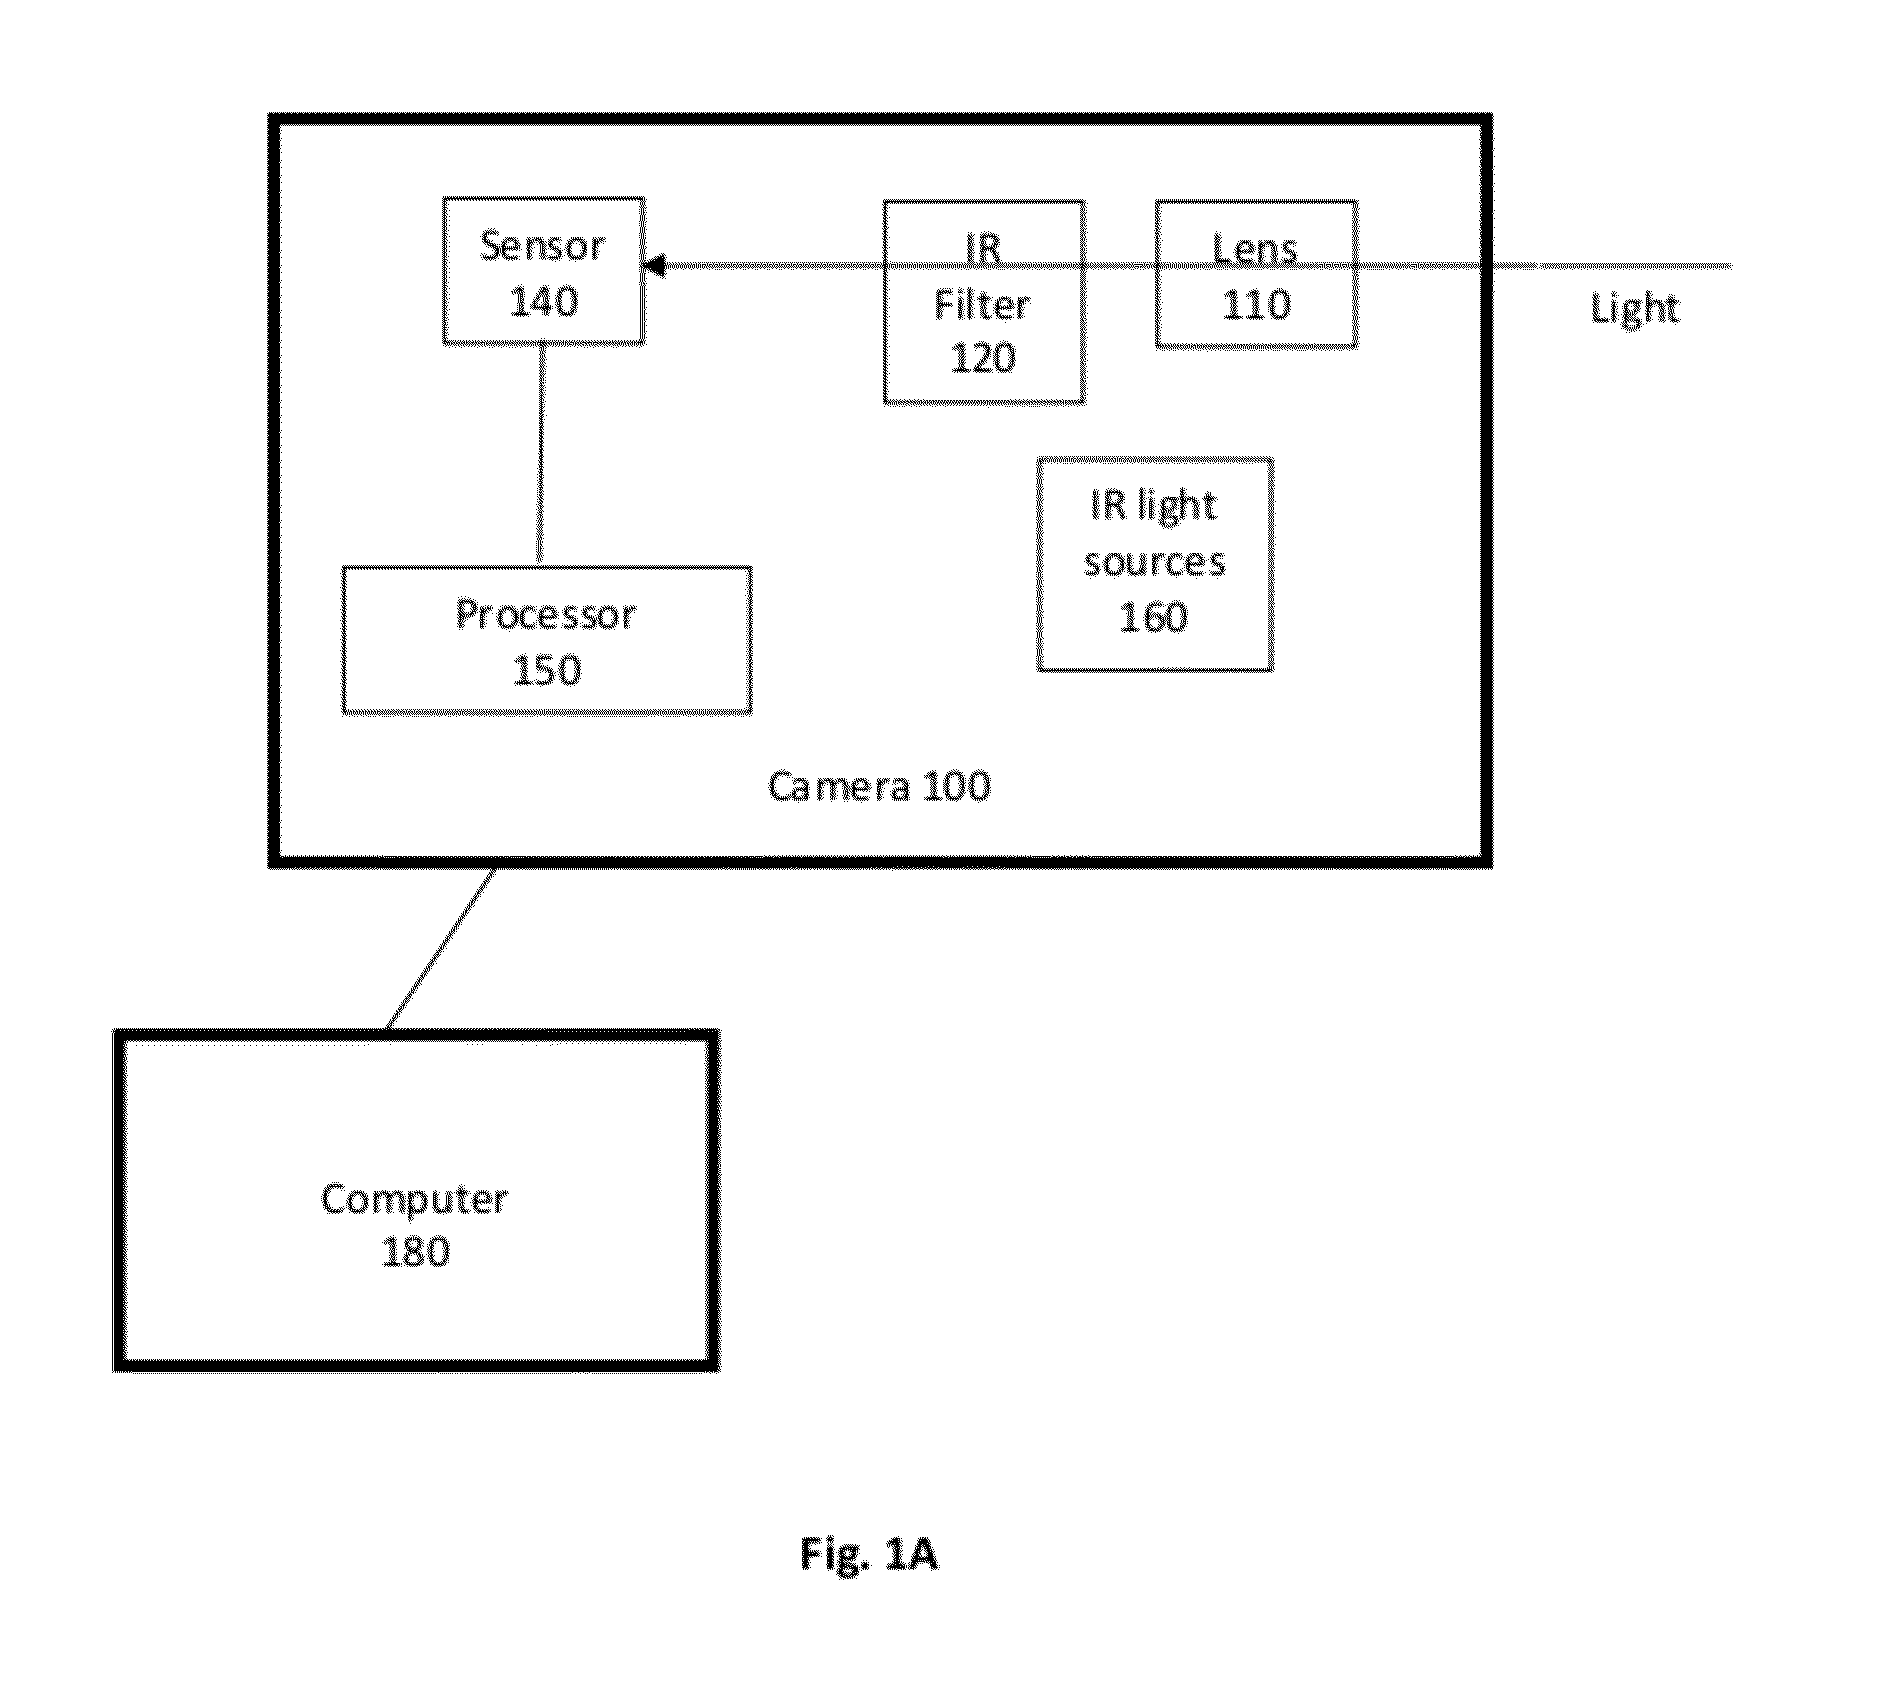 Optimized movable ir filter in cameras